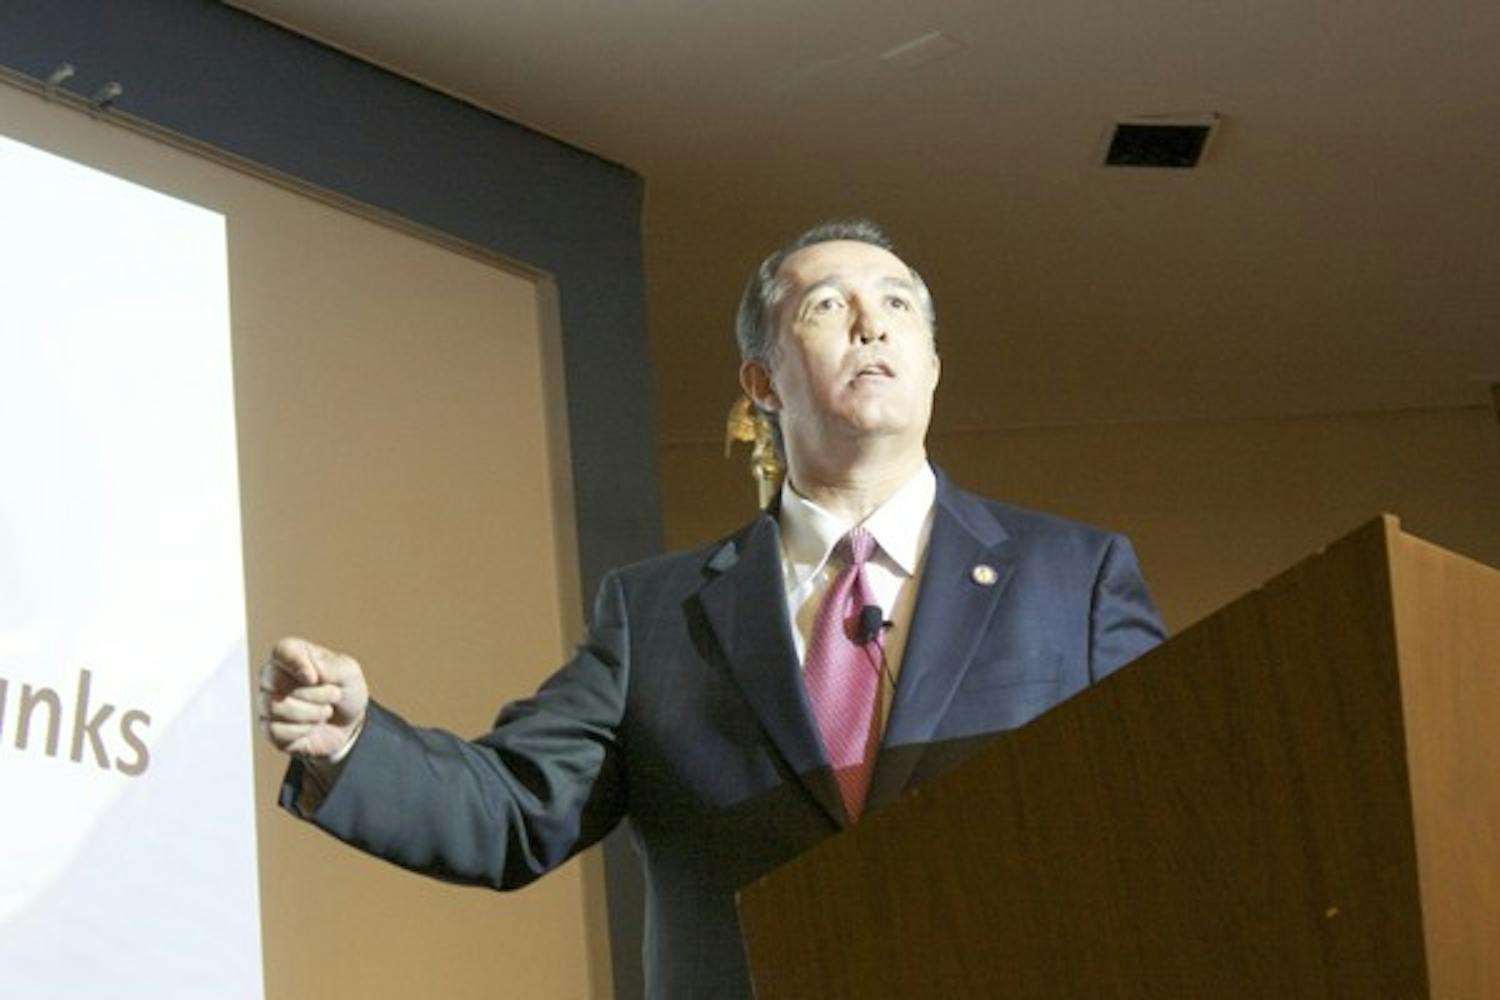 RESTORING COURAGE: Rep. Trent Franks, R-Ariz., speaks on Wednesday evening at the Glenn Beck-inspired “Restoring Courage” rally. (Photo by Shawn Raymundo)